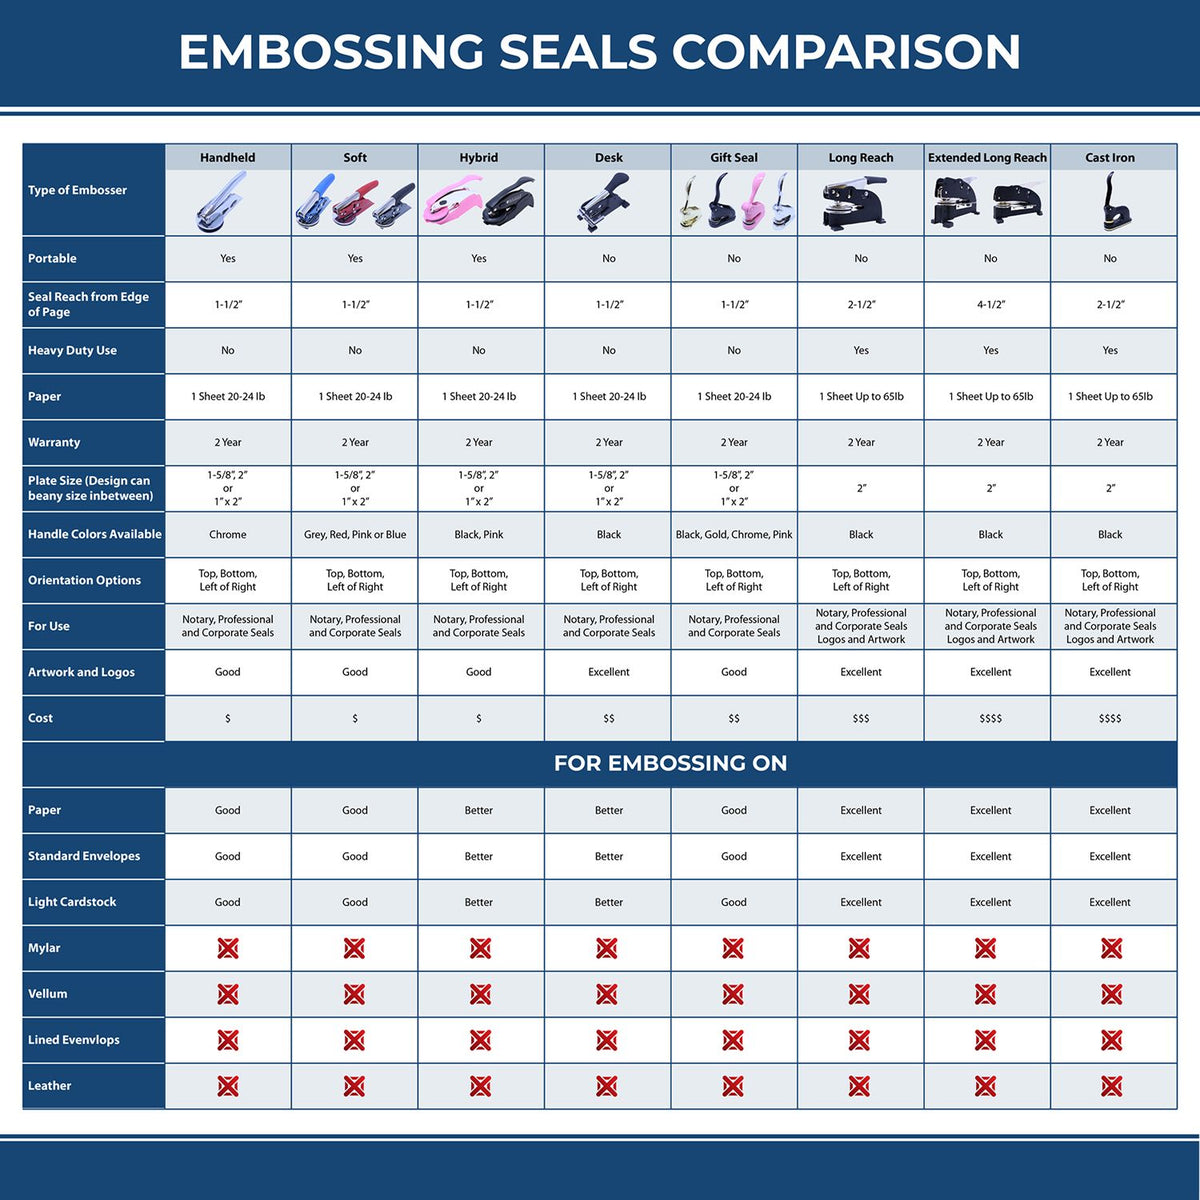 A comparison chart for the different types of mount models available for the Heavy Duty Cast Iron Hawaii Architect Embosser.